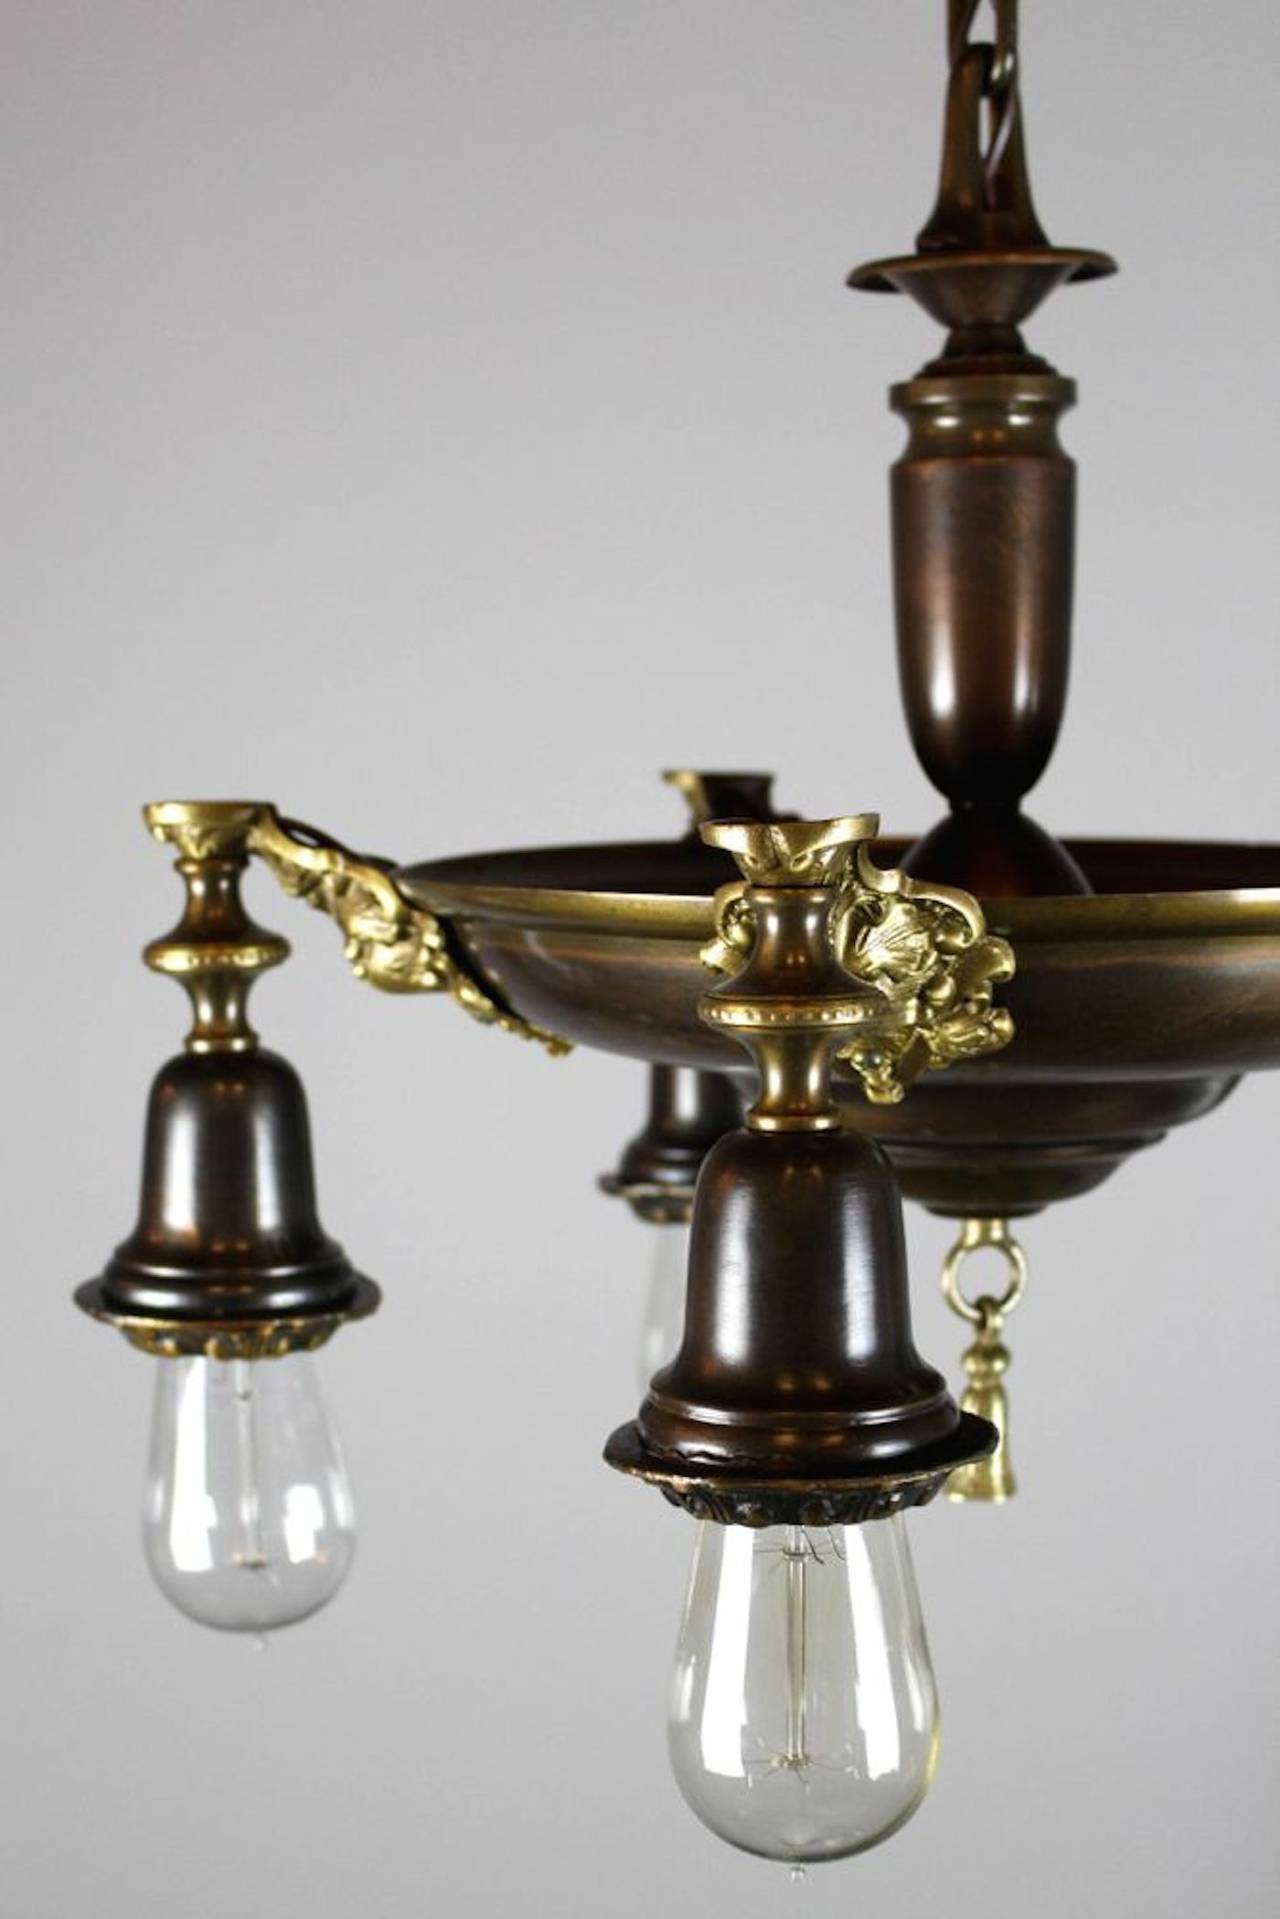 Two-Tone Edwardian Five-Light Pan Fixture with Bare Bulbs 1